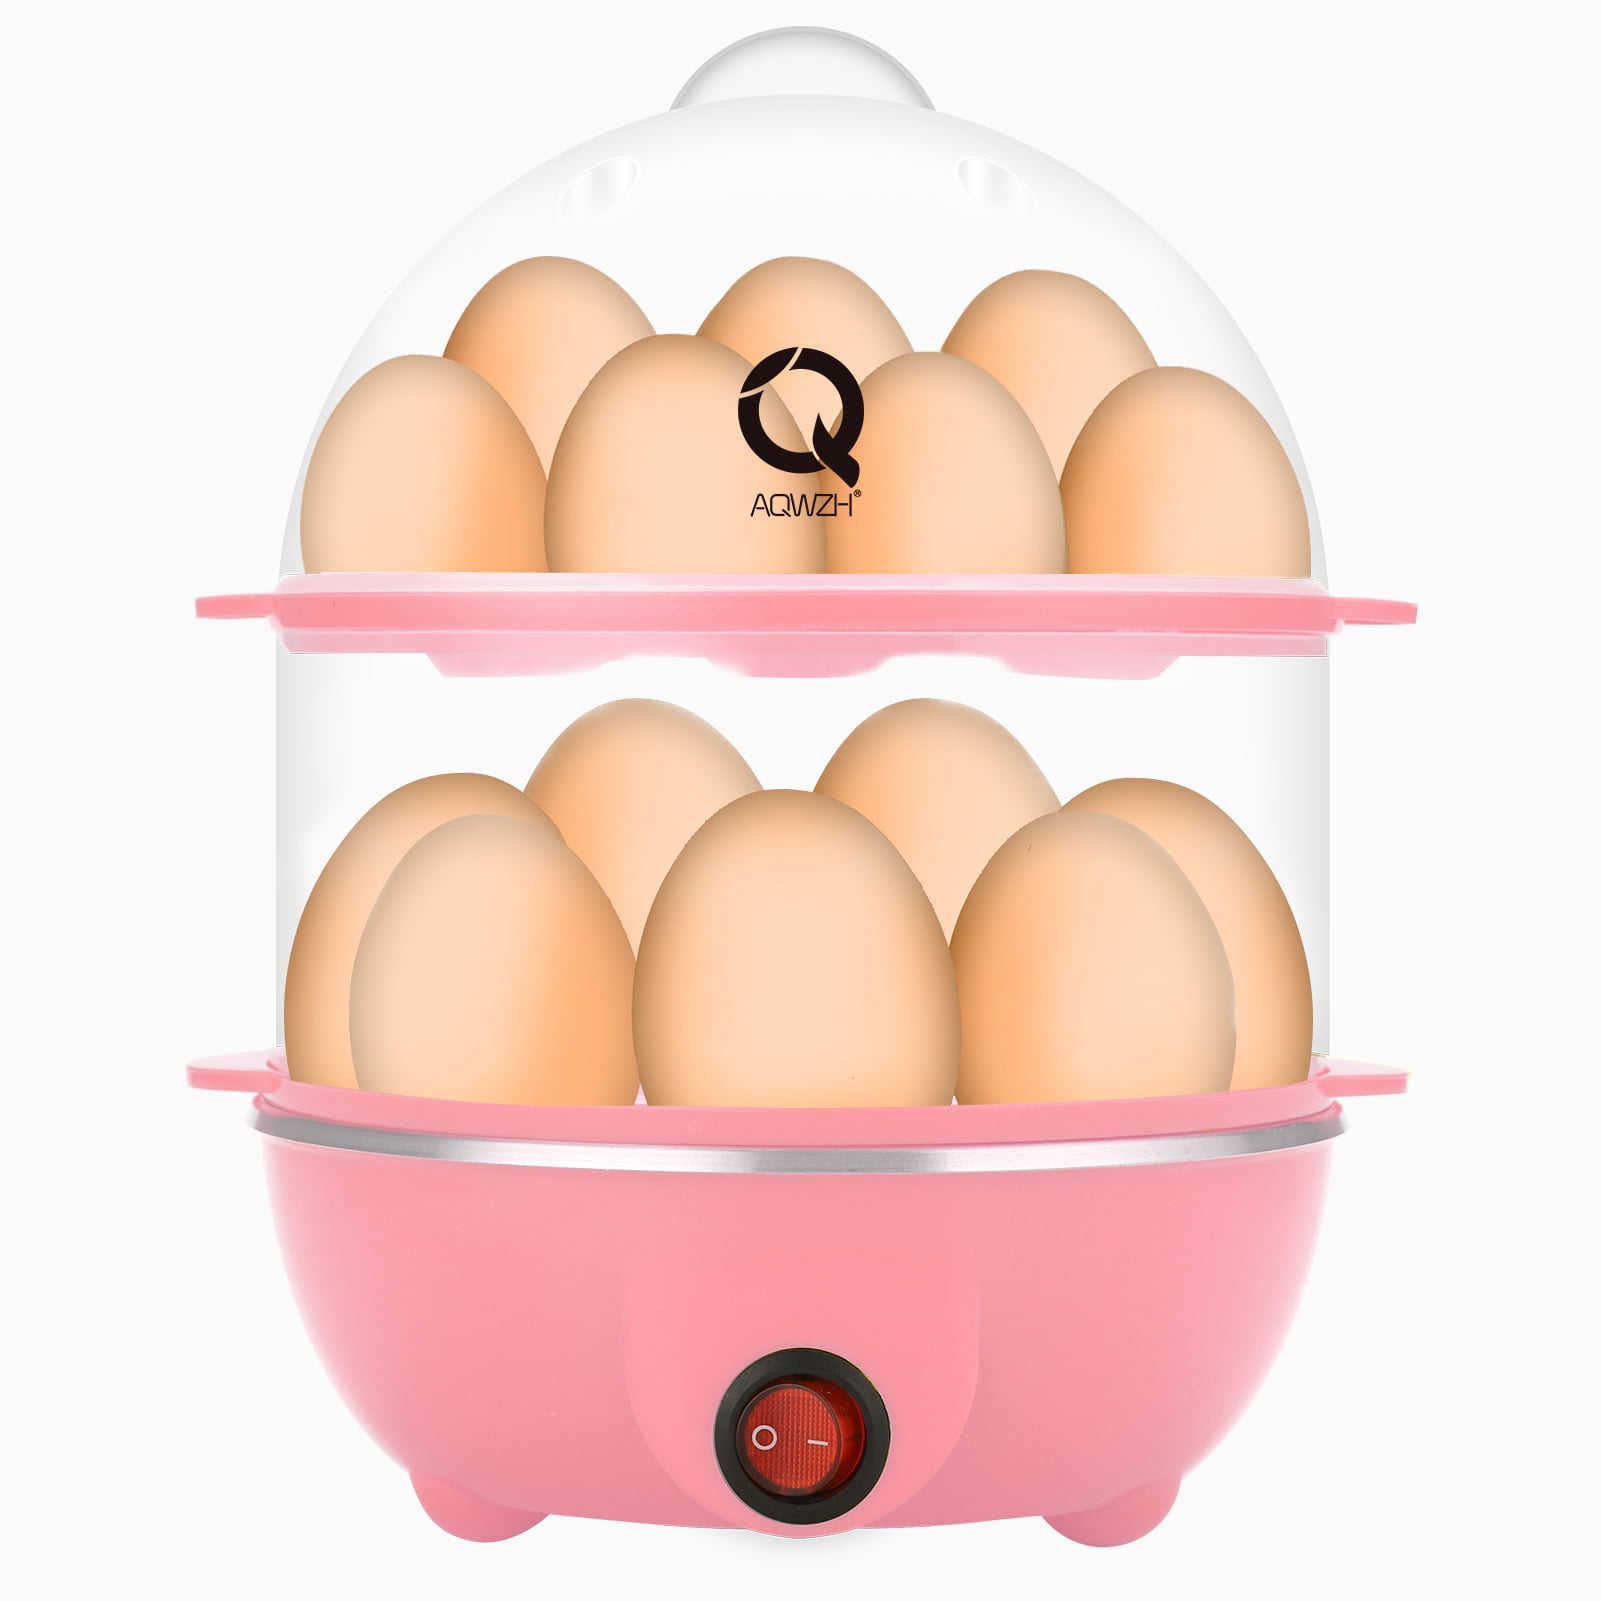  egg cookers 304 stainless steel inside and outside,Rapid Egg  Cooker, 9 Egg Capacity Electric Egg Cooker for Hard Boiled Eggs,Poacher Eggs,  Scrambled Eggs, Scrambled,Soft,Medium, Hard Boiled with Auto Shut-Off,30  Minutes Timer